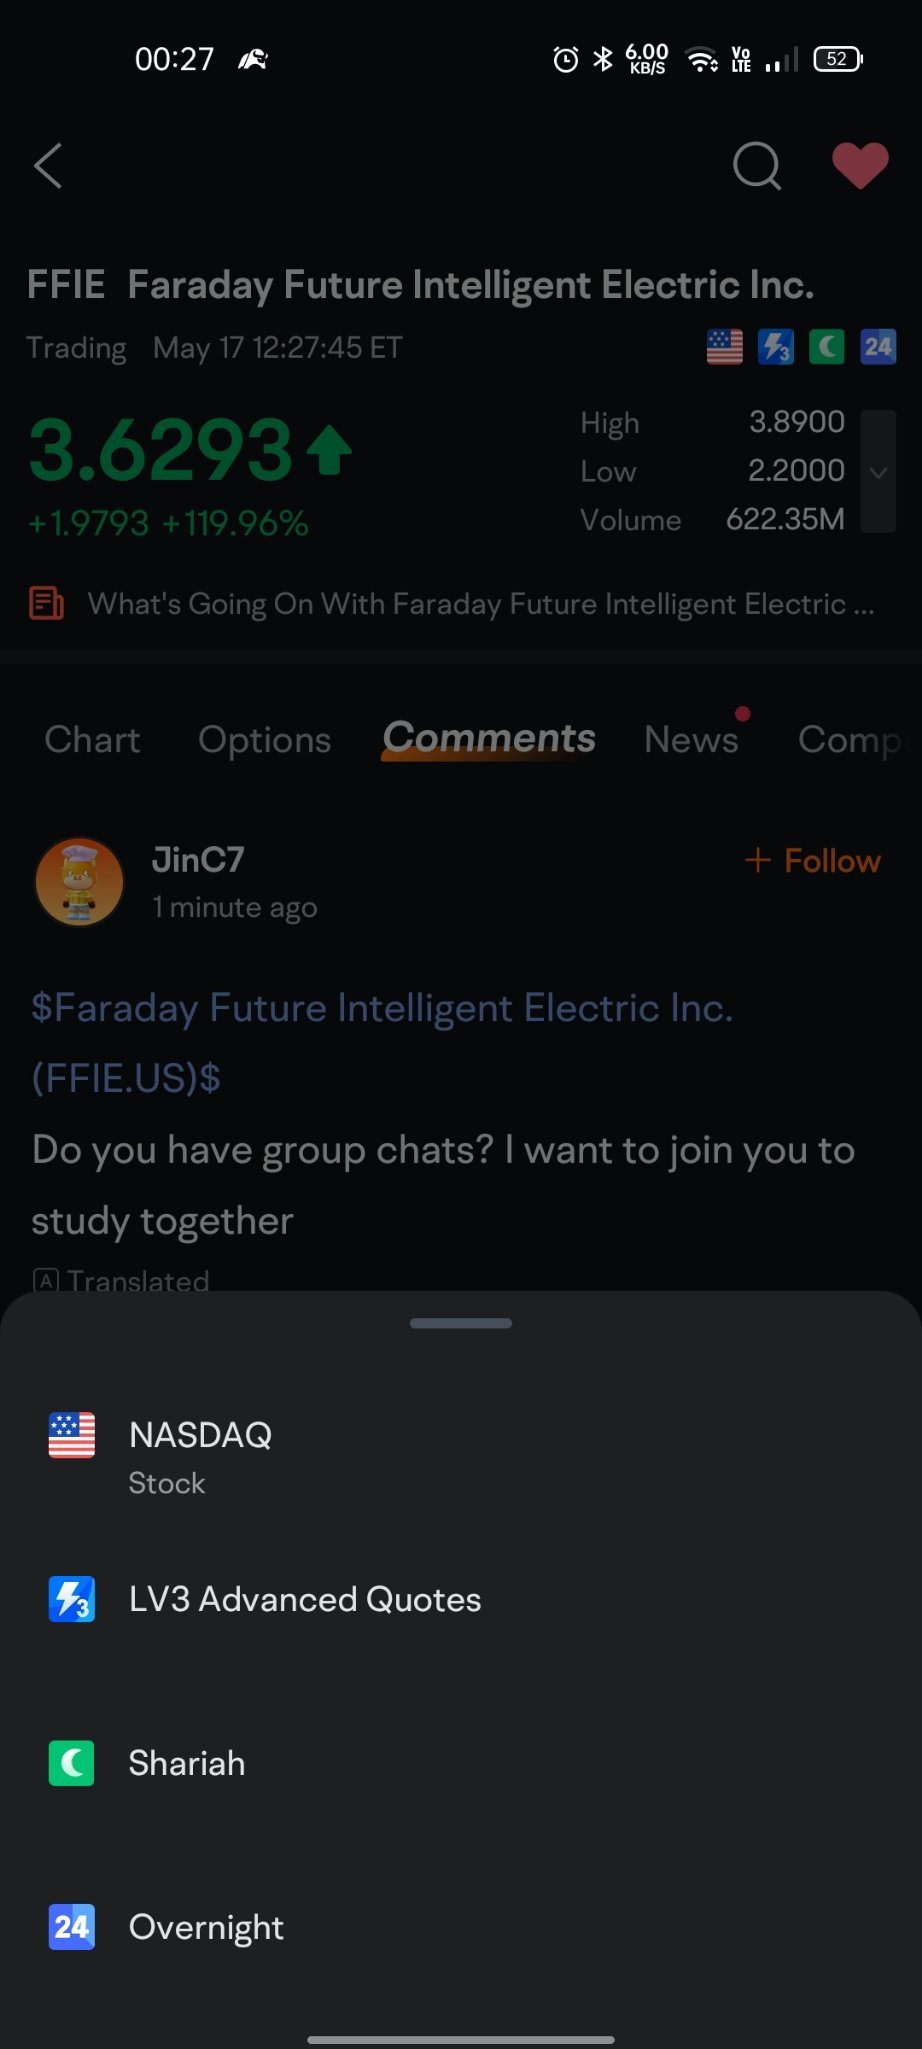 $Faraday Future Intelligent Electric Inc. (FFIE.US)$ Anyone explain this? Why become overnight traded??